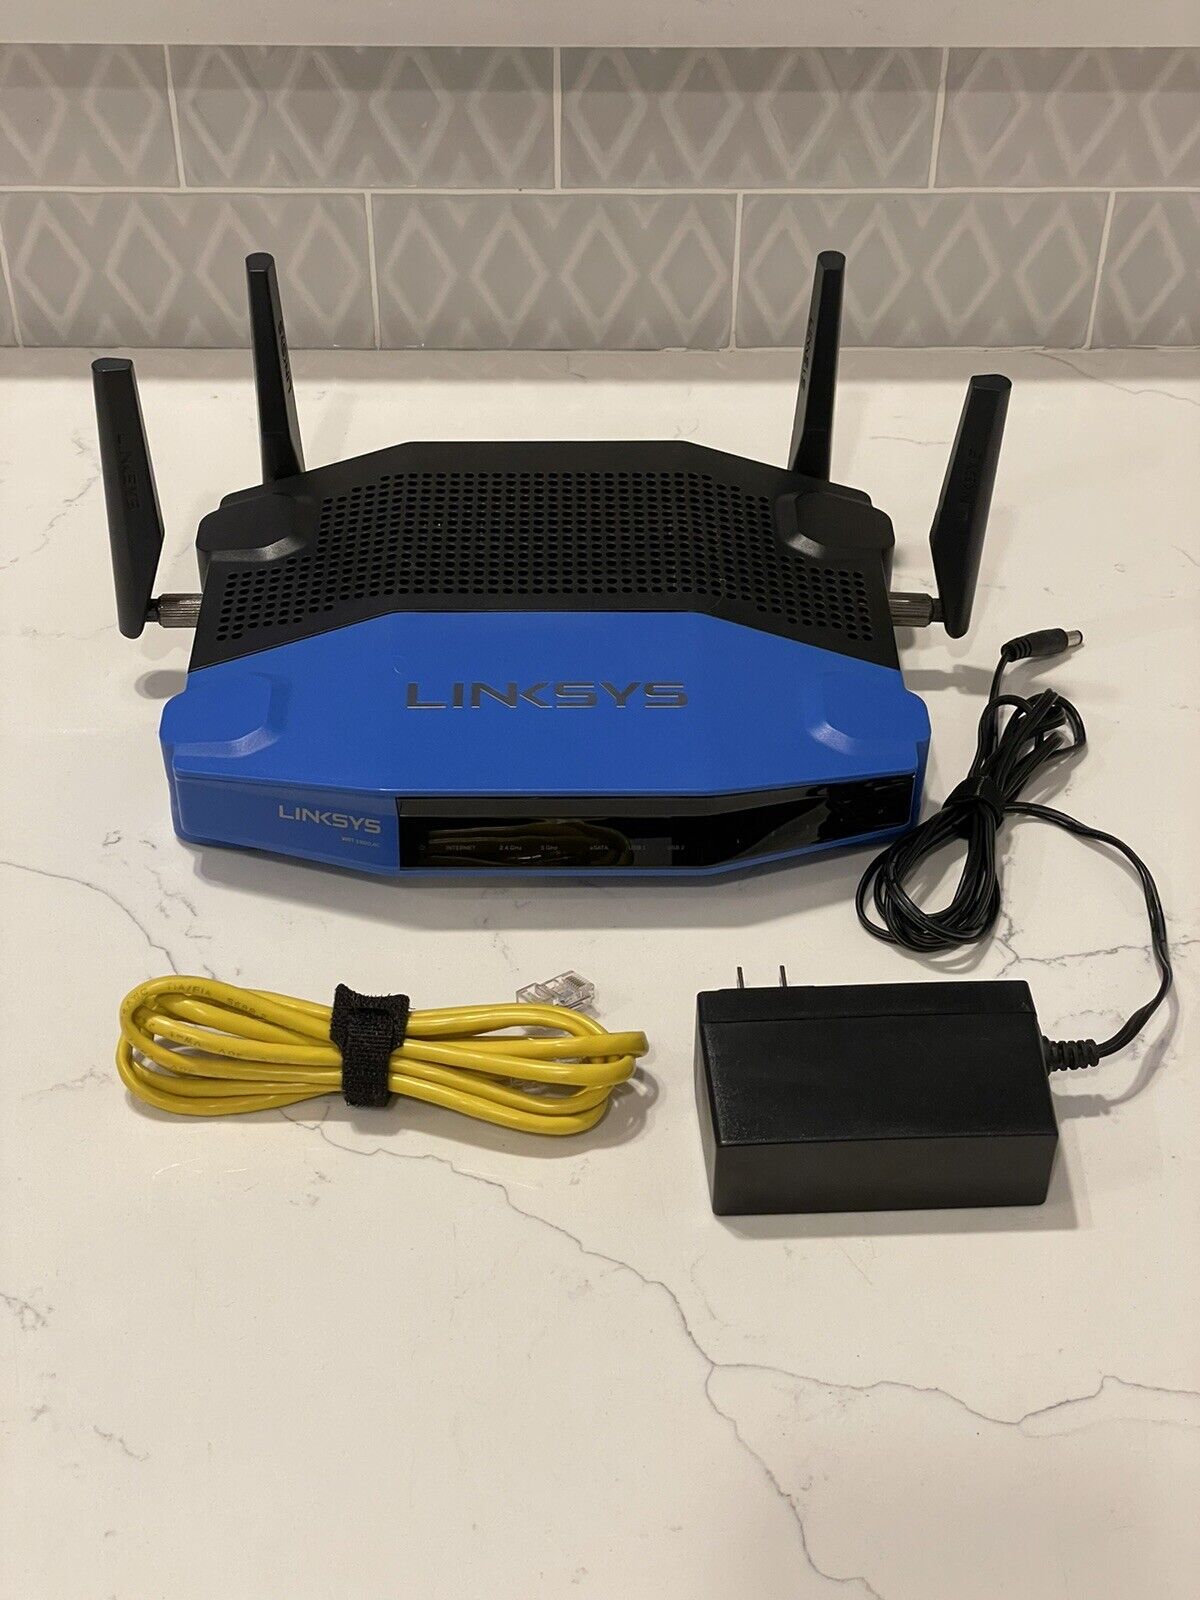 Linksys WRT1900AC 1300 Mbps Dual-Band Wi-Fi Router Supports Open Source Open-WRT